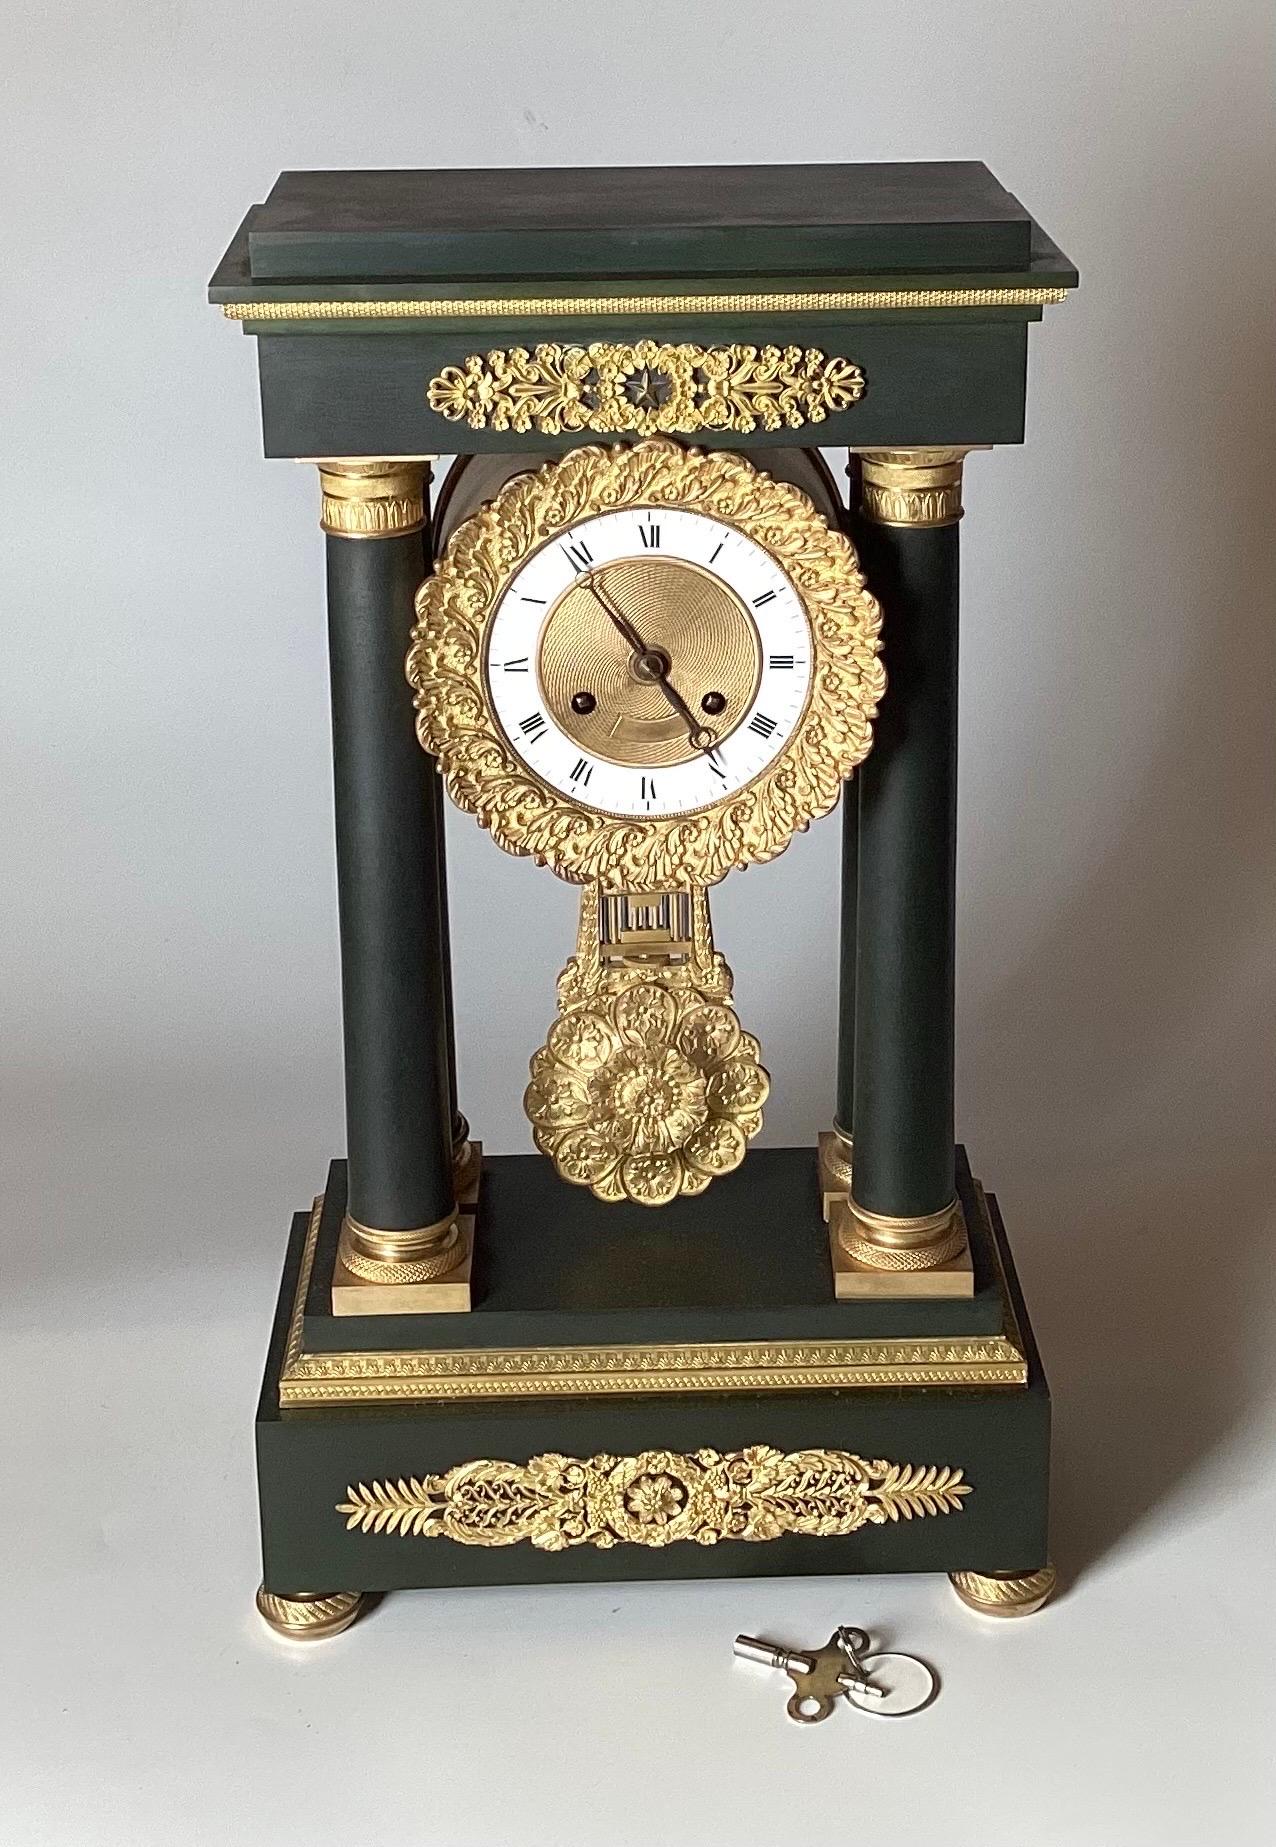 A French Neoclassical Style Gilt and Patinated Bronze Portico Clock, Retailed by J. E. Caldwell & Co., Philadelphia, 19th Century. The circular enamel dial having Roman numerals and inscribed 'J. E. Caldwell & Co.', the twin train movement with